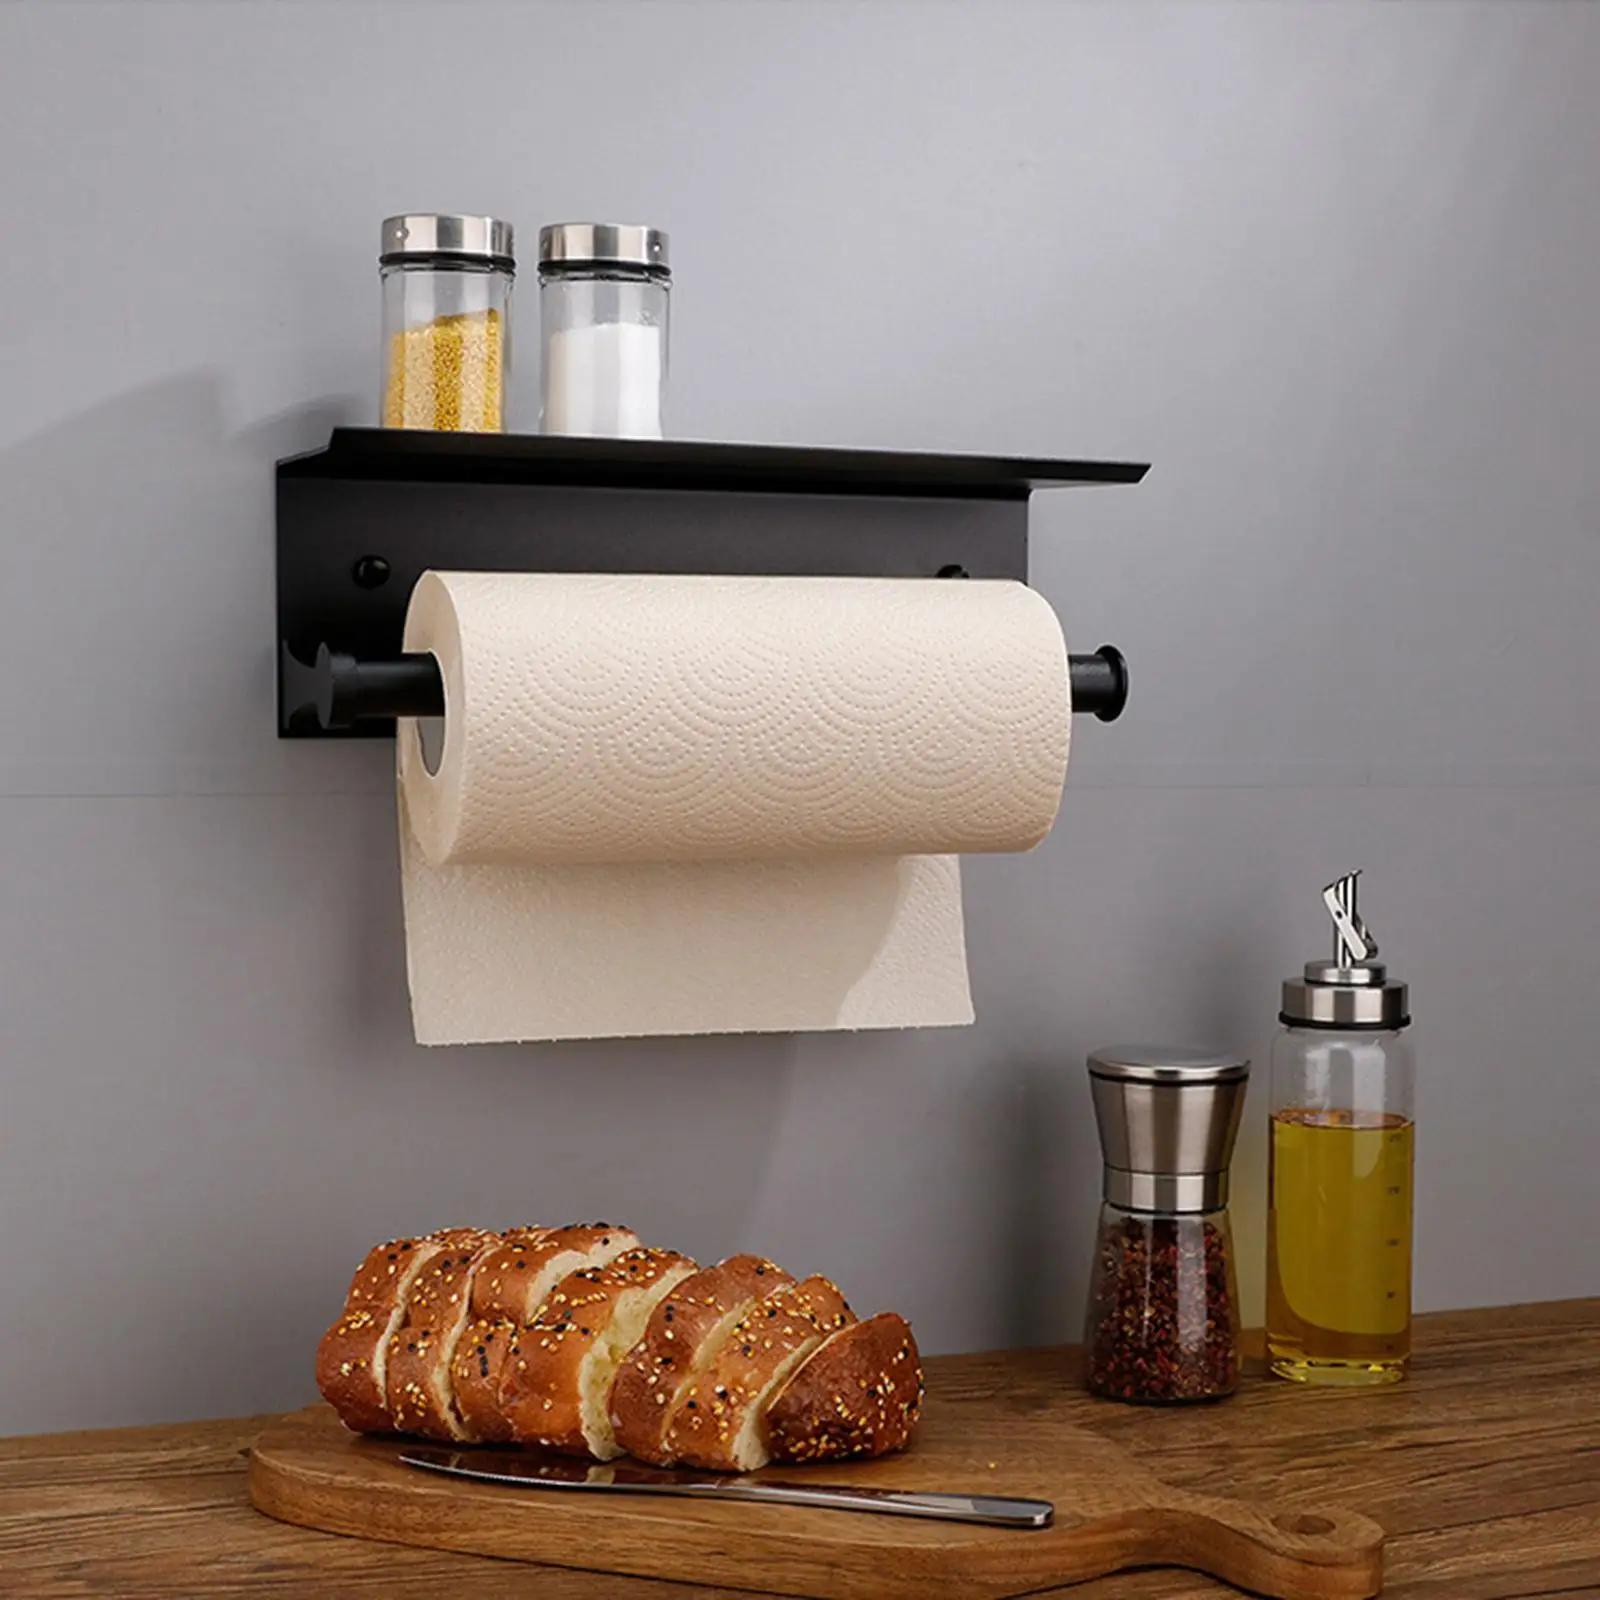 Stainless Steel Toilet Paper Holder with Screws Wall Mount Organizer Paper Towel Holder for Kitchen Washroom